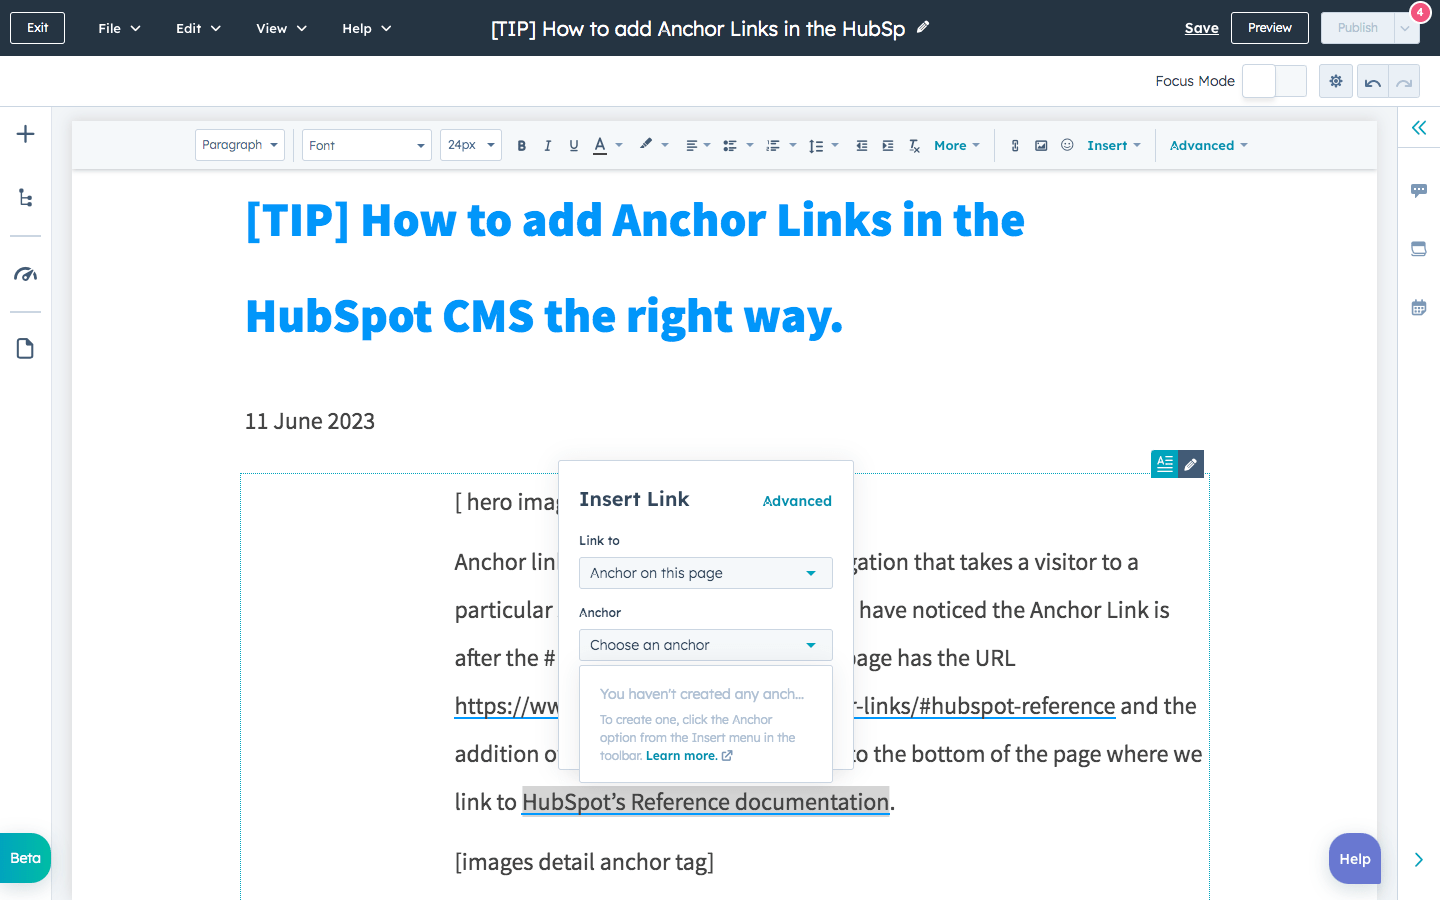 The only disadvantage of by passing HubSpot's Anchor Links feature.